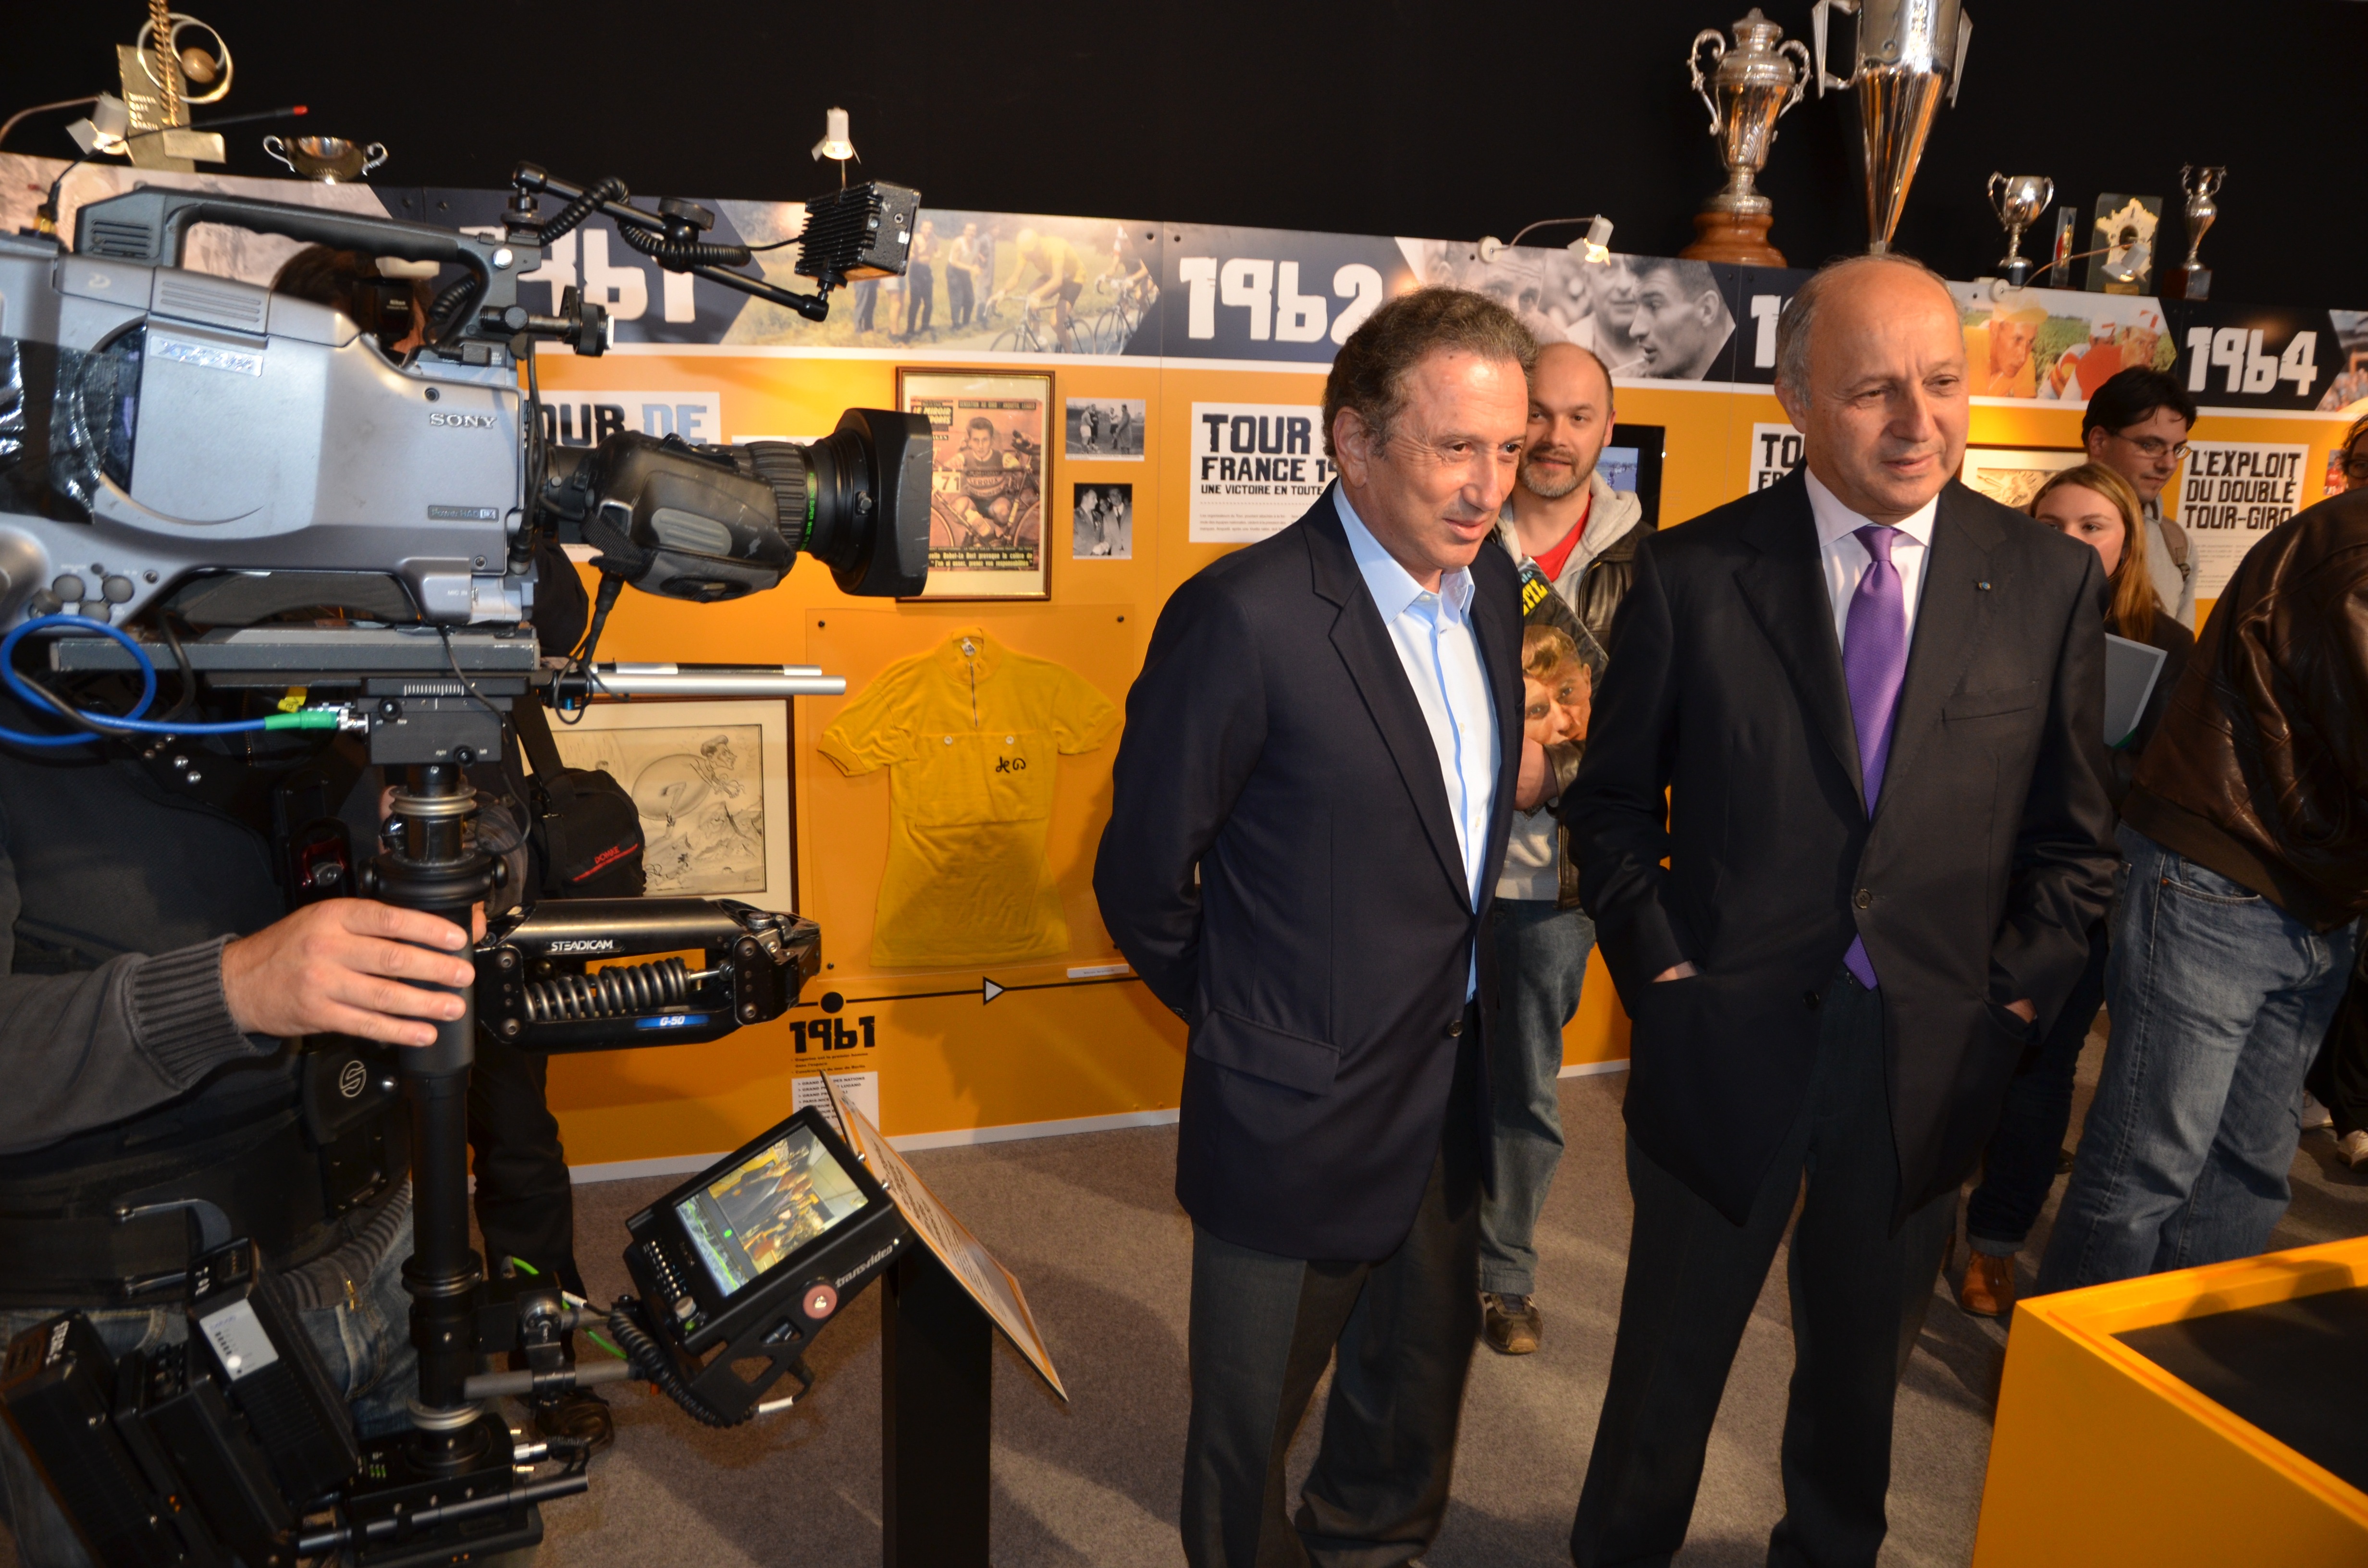 CineMonitorHD-Inauguration-of-exhibition-Jacques-Anquetil